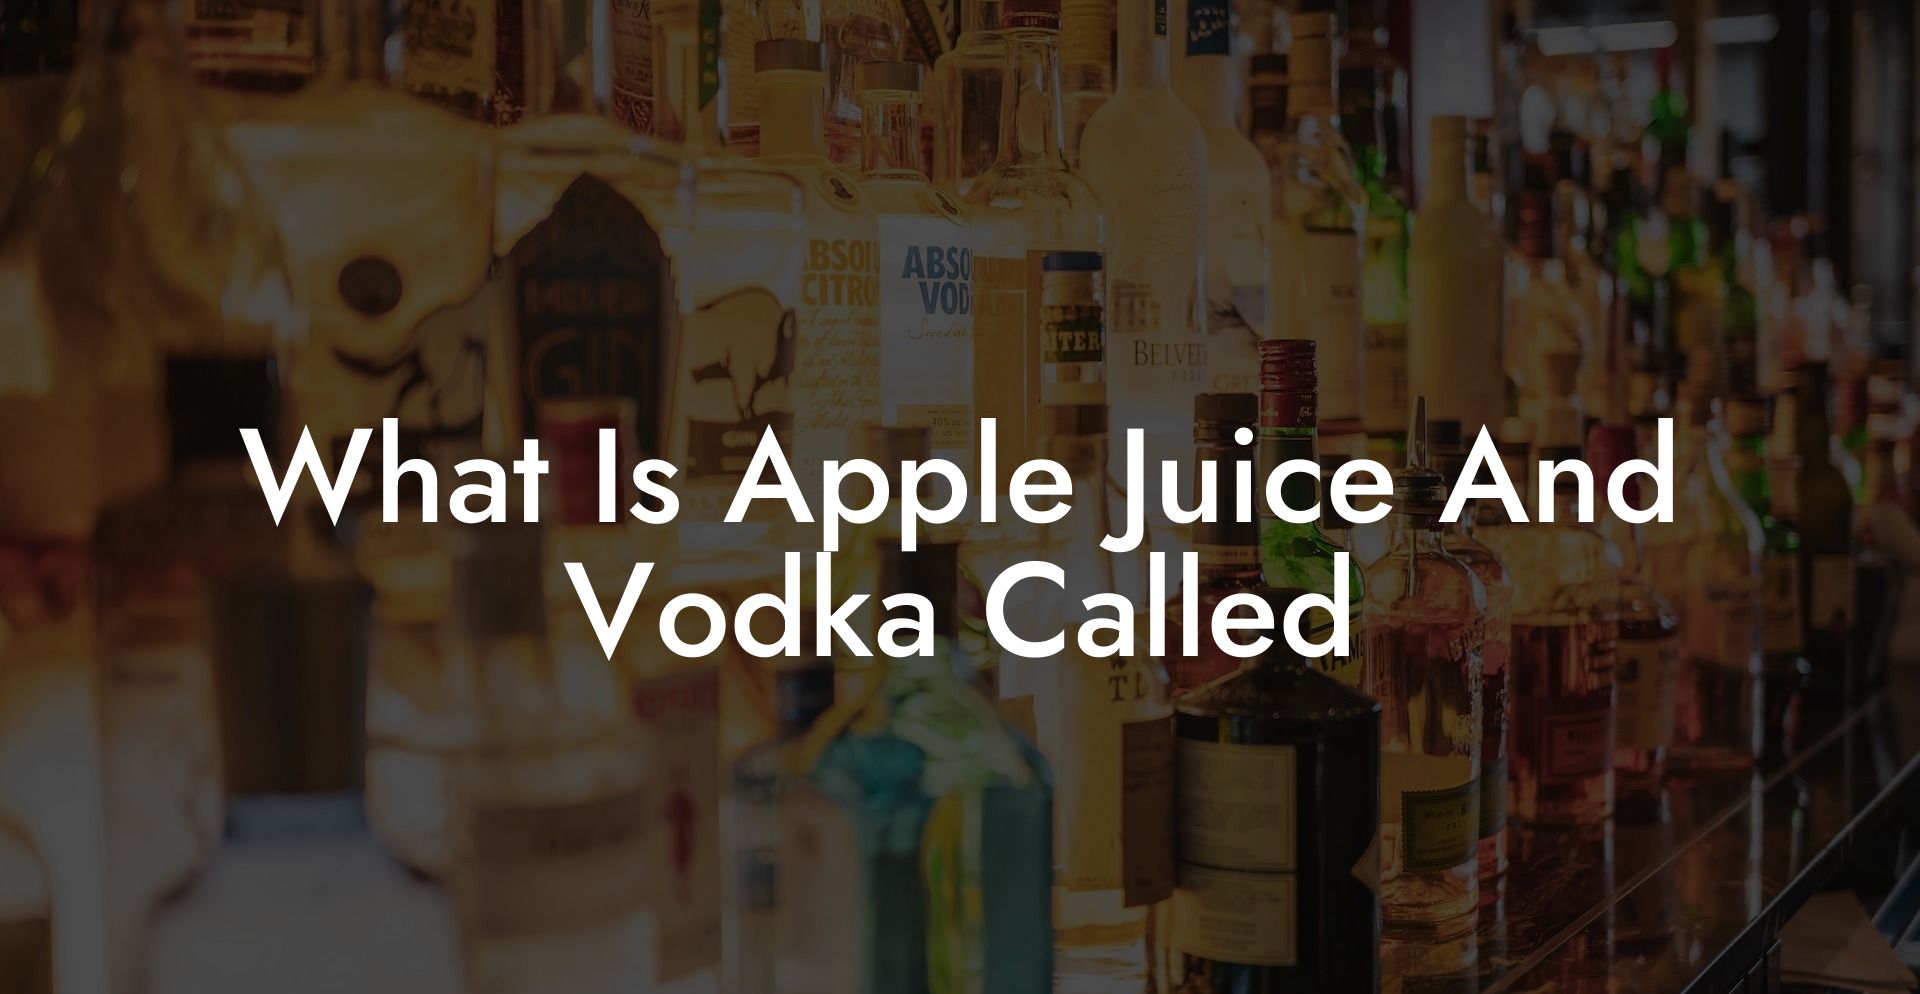 What Is Apple Juice And Vodka Called